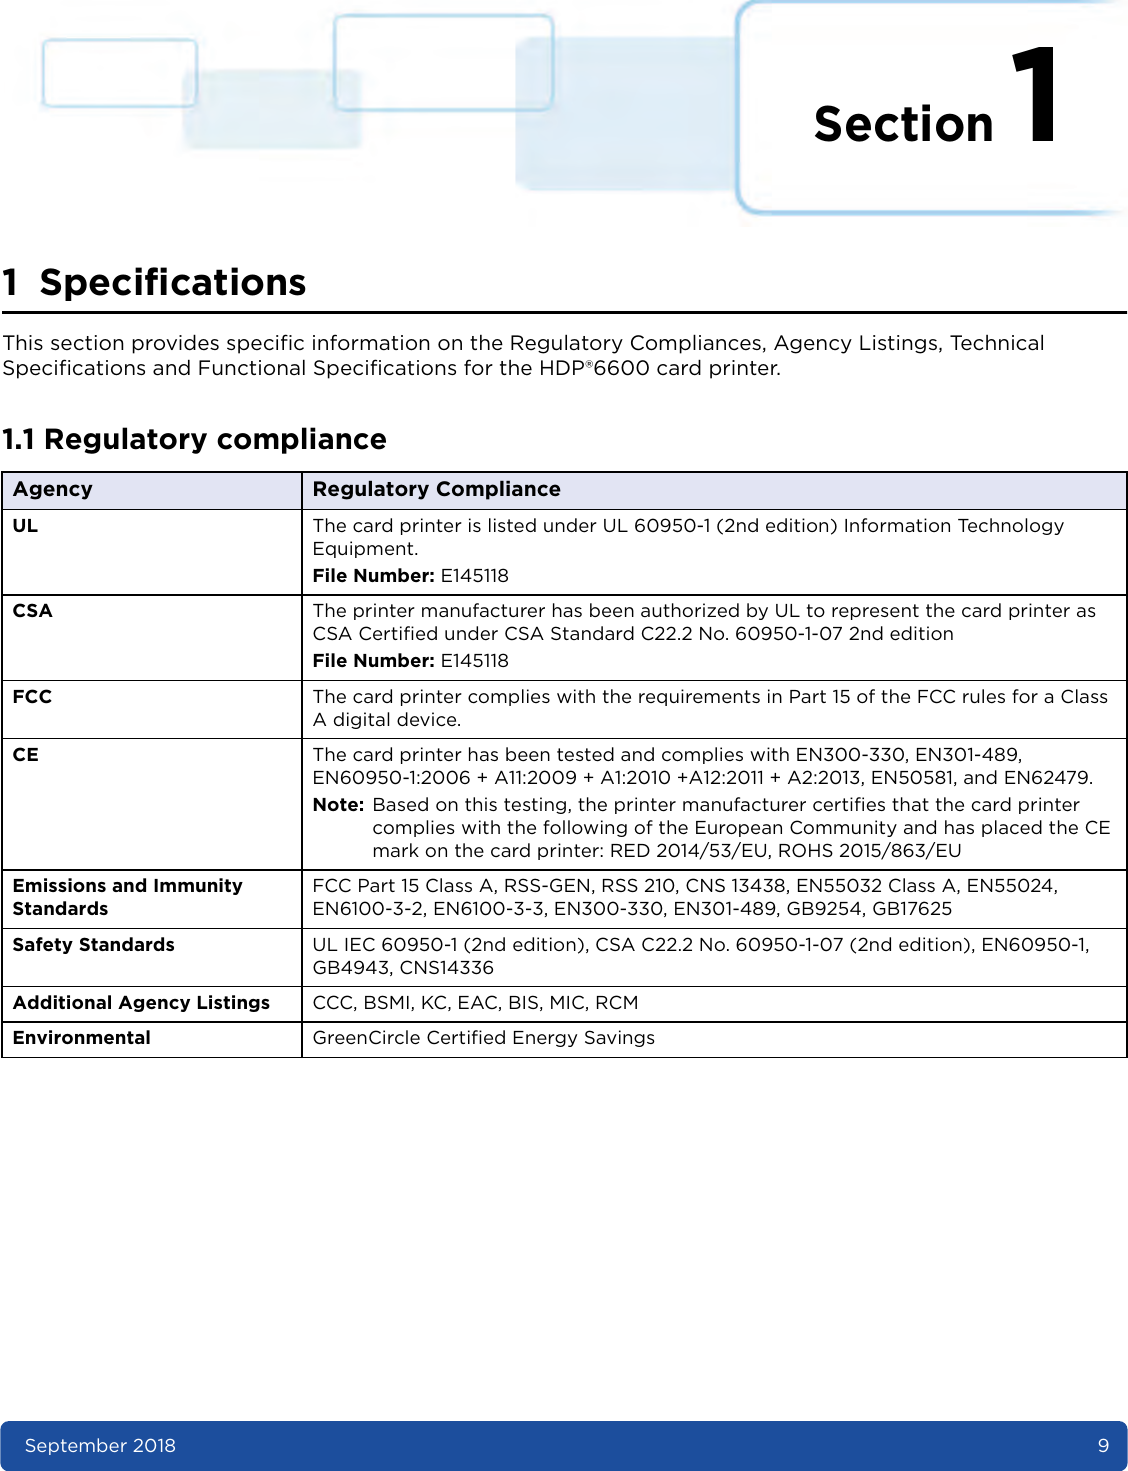 Section 1September 2018 91 SpecificationsThis section provides specific information on the Regulatory Compliances, Agency Listings, Technical Specifications and Functional Specifications for the HDP®6600 card printer.1.1 Regulatory complianceAgency Regulatory ComplianceUL The card printer is listed under UL 60950-1 (2nd edition) Information Technology Equipment.File Number: E145118CSA The printer manufacturer has been authorized by UL to represent the card printer as CSA Certified under CSA Standard C22.2 No. 60950-1-07 2nd editionFile Number: E145118FCC The card printer complies with the requirements in Part 15 of the FCC rules for a Class A digital device.CE The card printer has been tested and complies with EN300-330, EN301-489, EN60950-1:2006 + A11:2009 + A1:2010 +A12:2011 + A2:2013, EN50581, and EN62479.Note: Based on this testing, the printer manufacturer certifies that the card printer complies with the following of the European Community and has placed the CE mark on the card printer: RED 2014/53/EU, ROHS 2015/863/EUEmissions and Immunity StandardsFCC Part 15 Class A, RSS-GEN, RSS 210, CNS 13438, EN55032 Class A, EN55024, EN6100-3-2, EN6100-3-3, EN300-330, EN301-489, GB9254, GB17625Safety Standards UL IEC 60950-1 (2nd edition), CSA C22.2 No. 60950-1-07 (2nd edition), EN60950-1, GB4943, CNS14336Additional Agency Listings CCC, BSMI, KC, EAC, BIS, MIC, RCMEnvironmental GreenCircle Certified Energy Savings